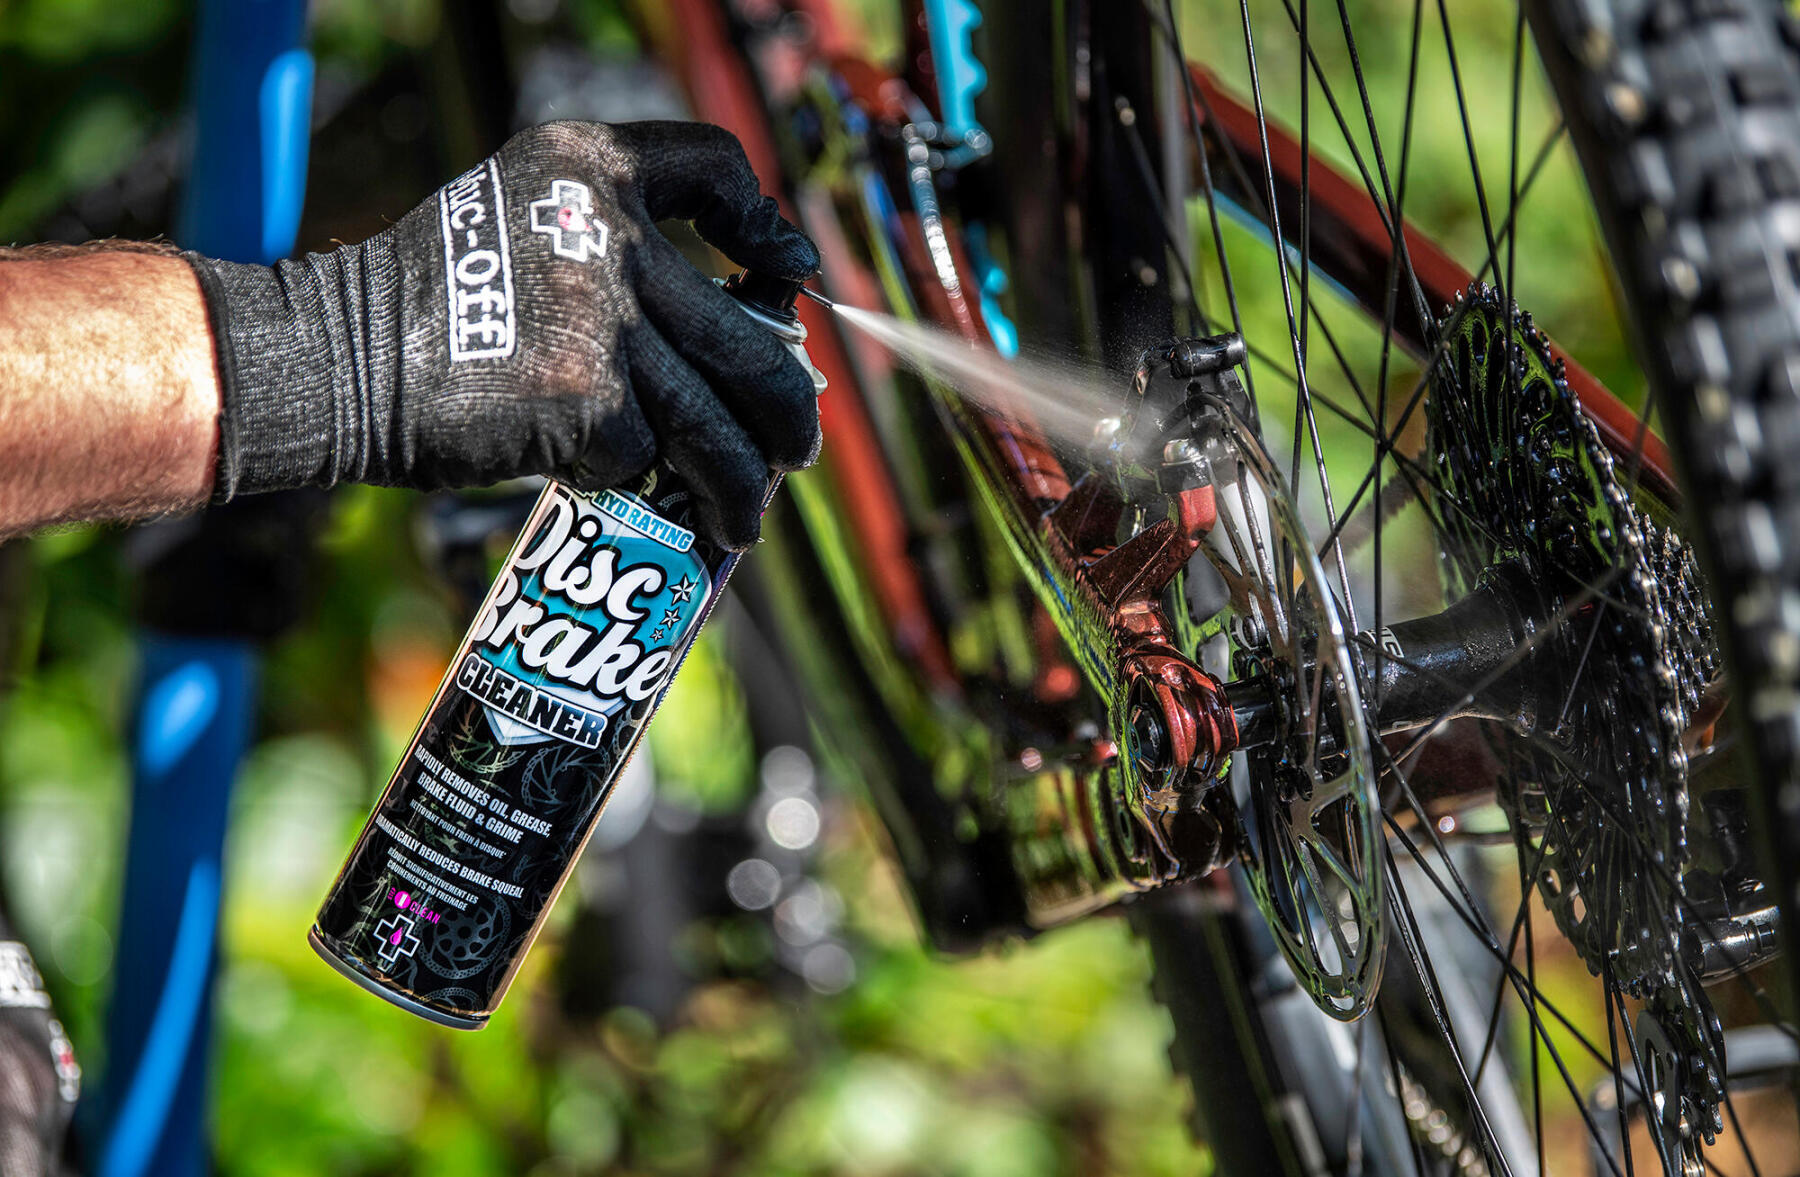 Use Muc-off dis brake cleaner to keep your bike brake system more clean